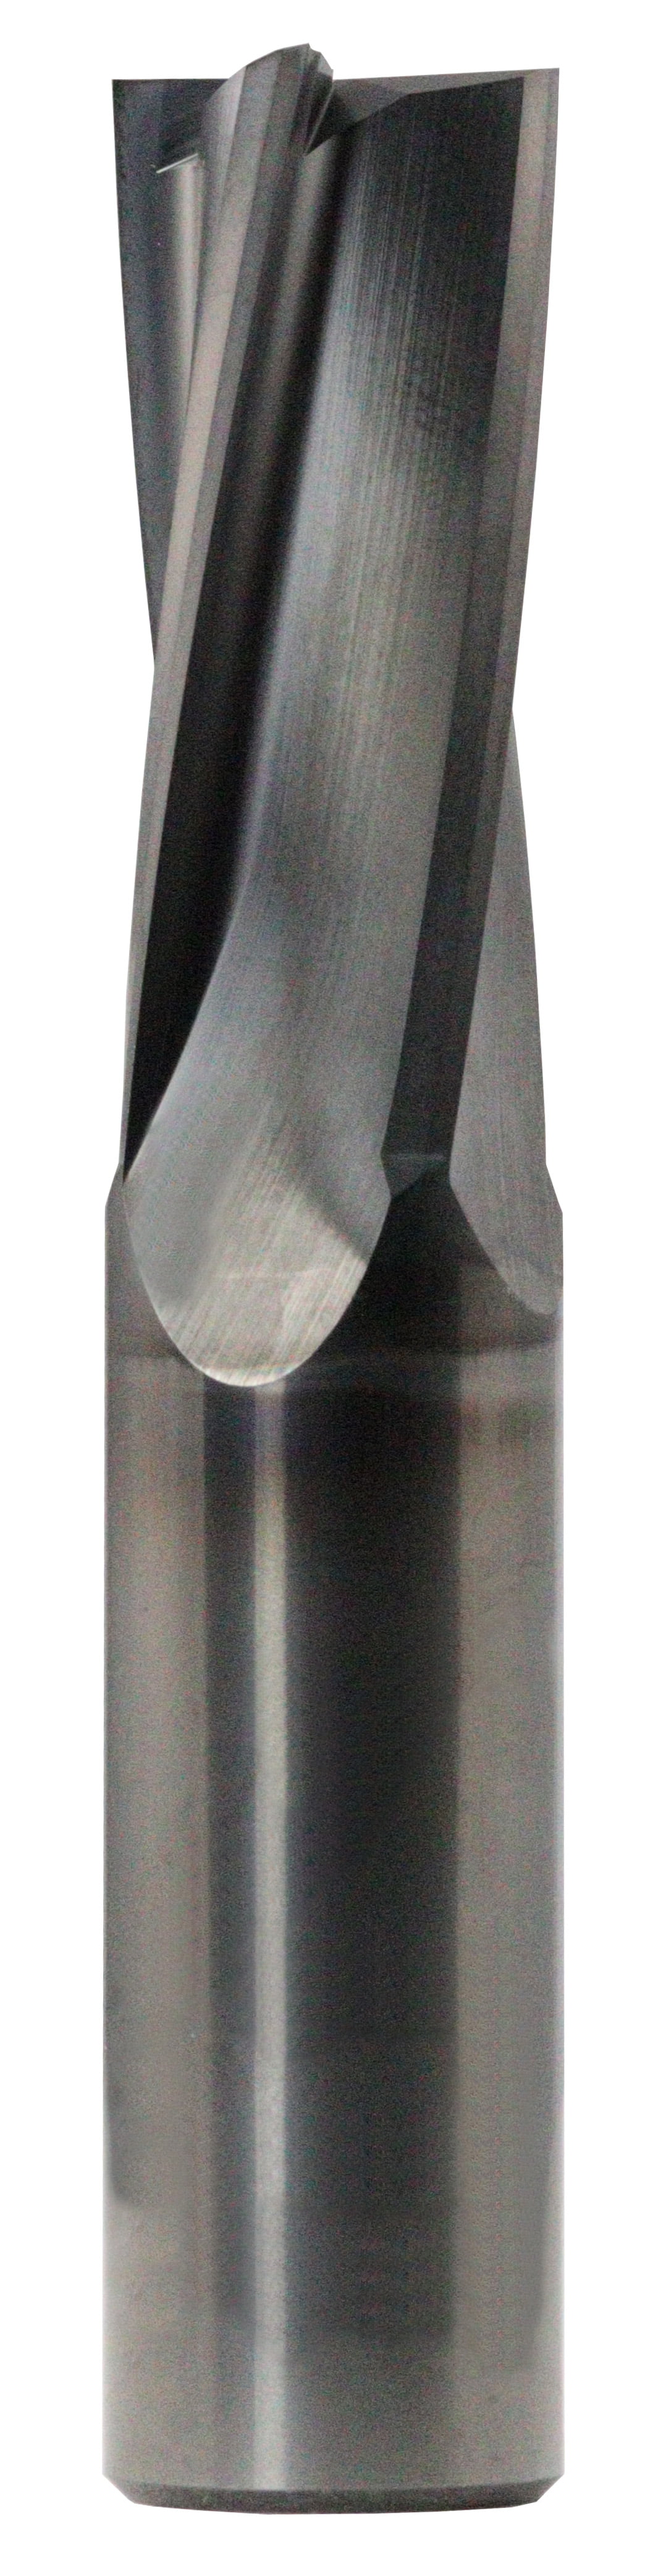 10.00mm Dia, 4 Flute, Square End End Mill - 83061